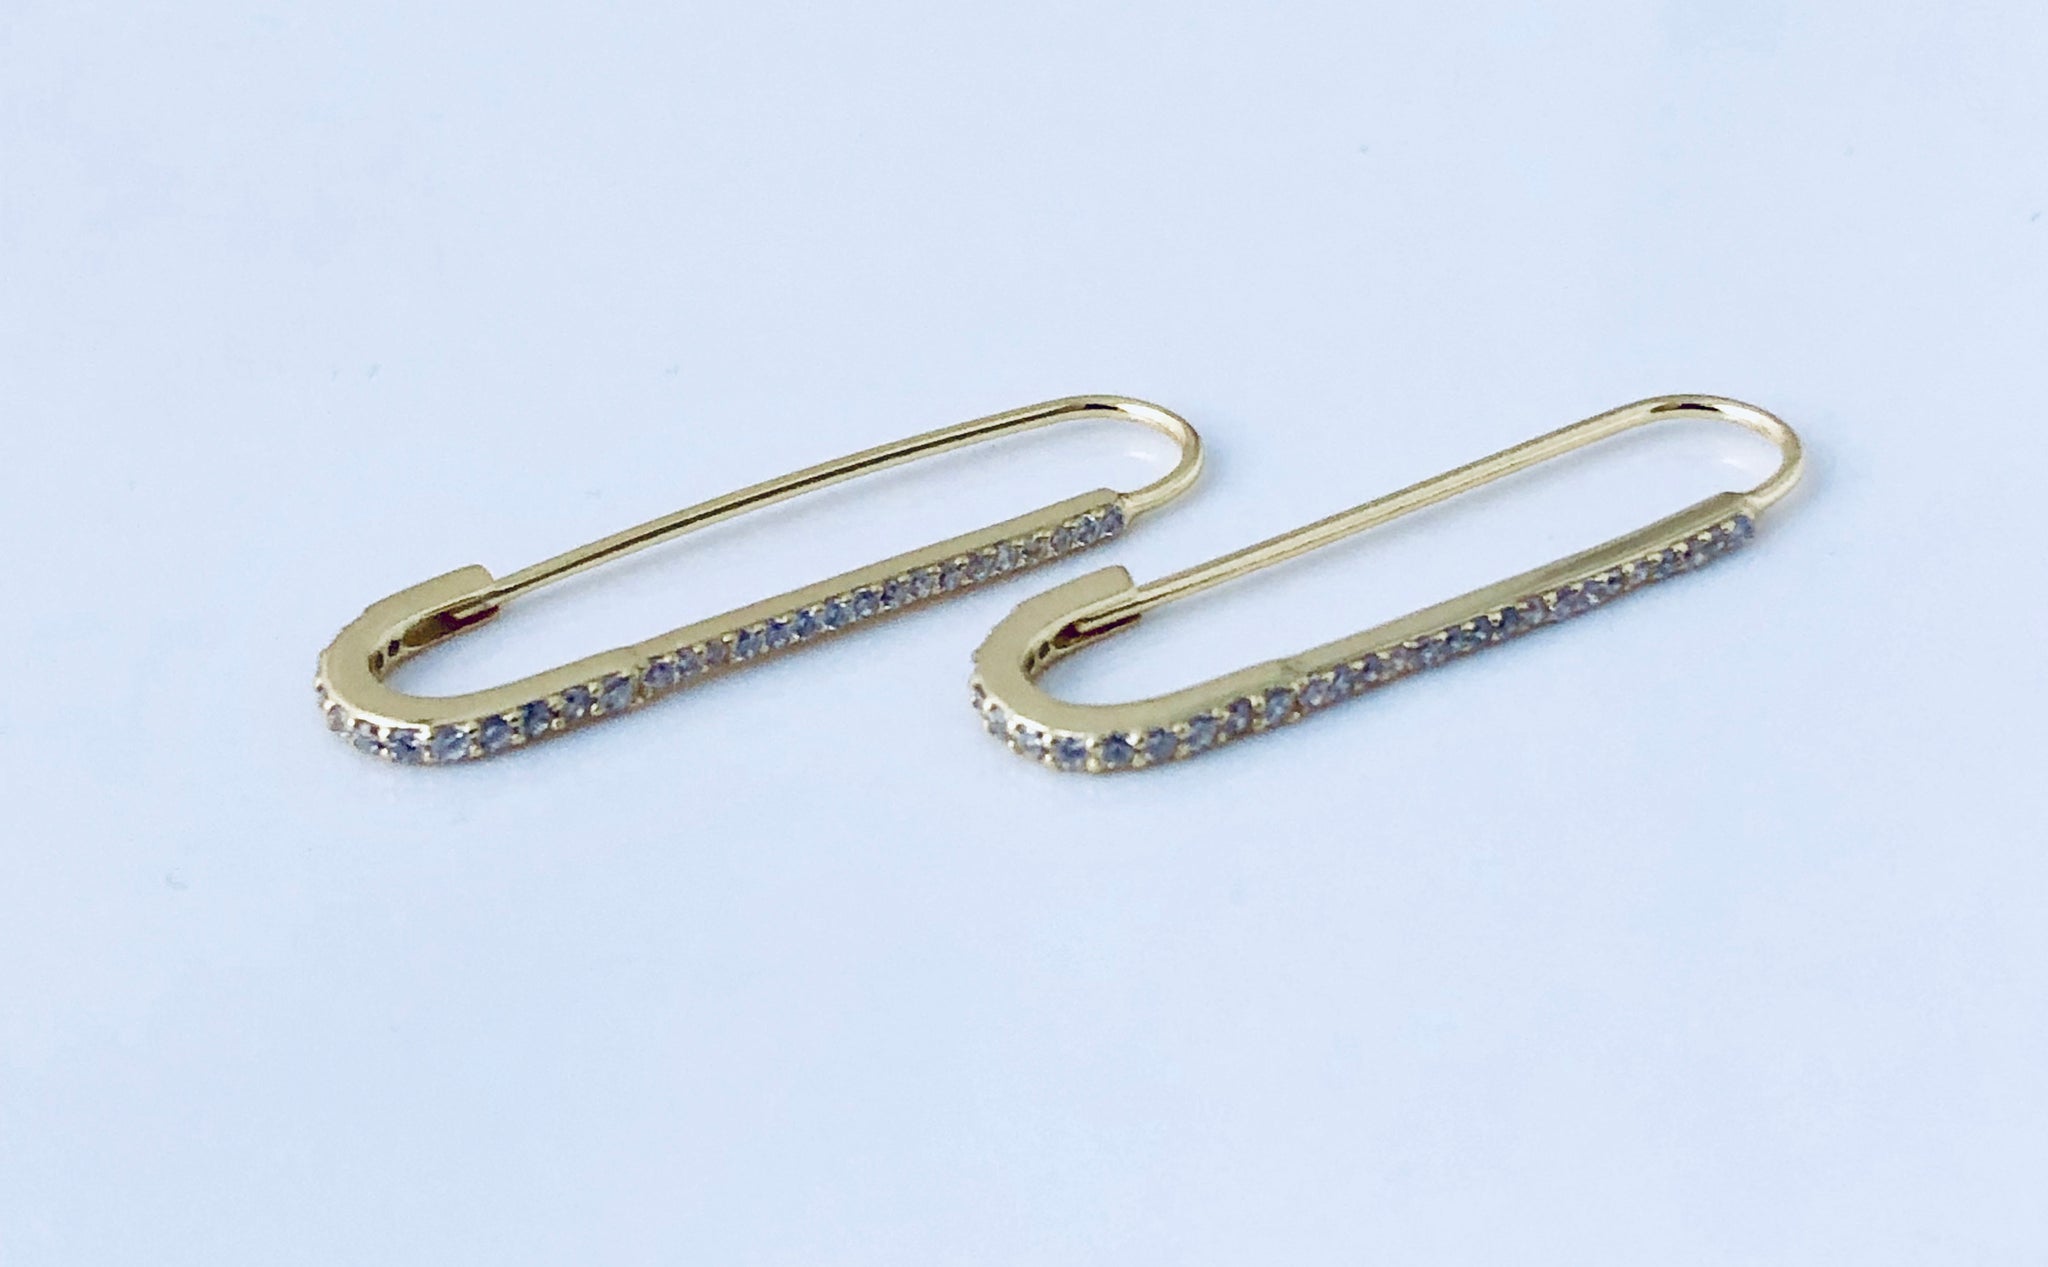 Silver Safety Pin Earrings